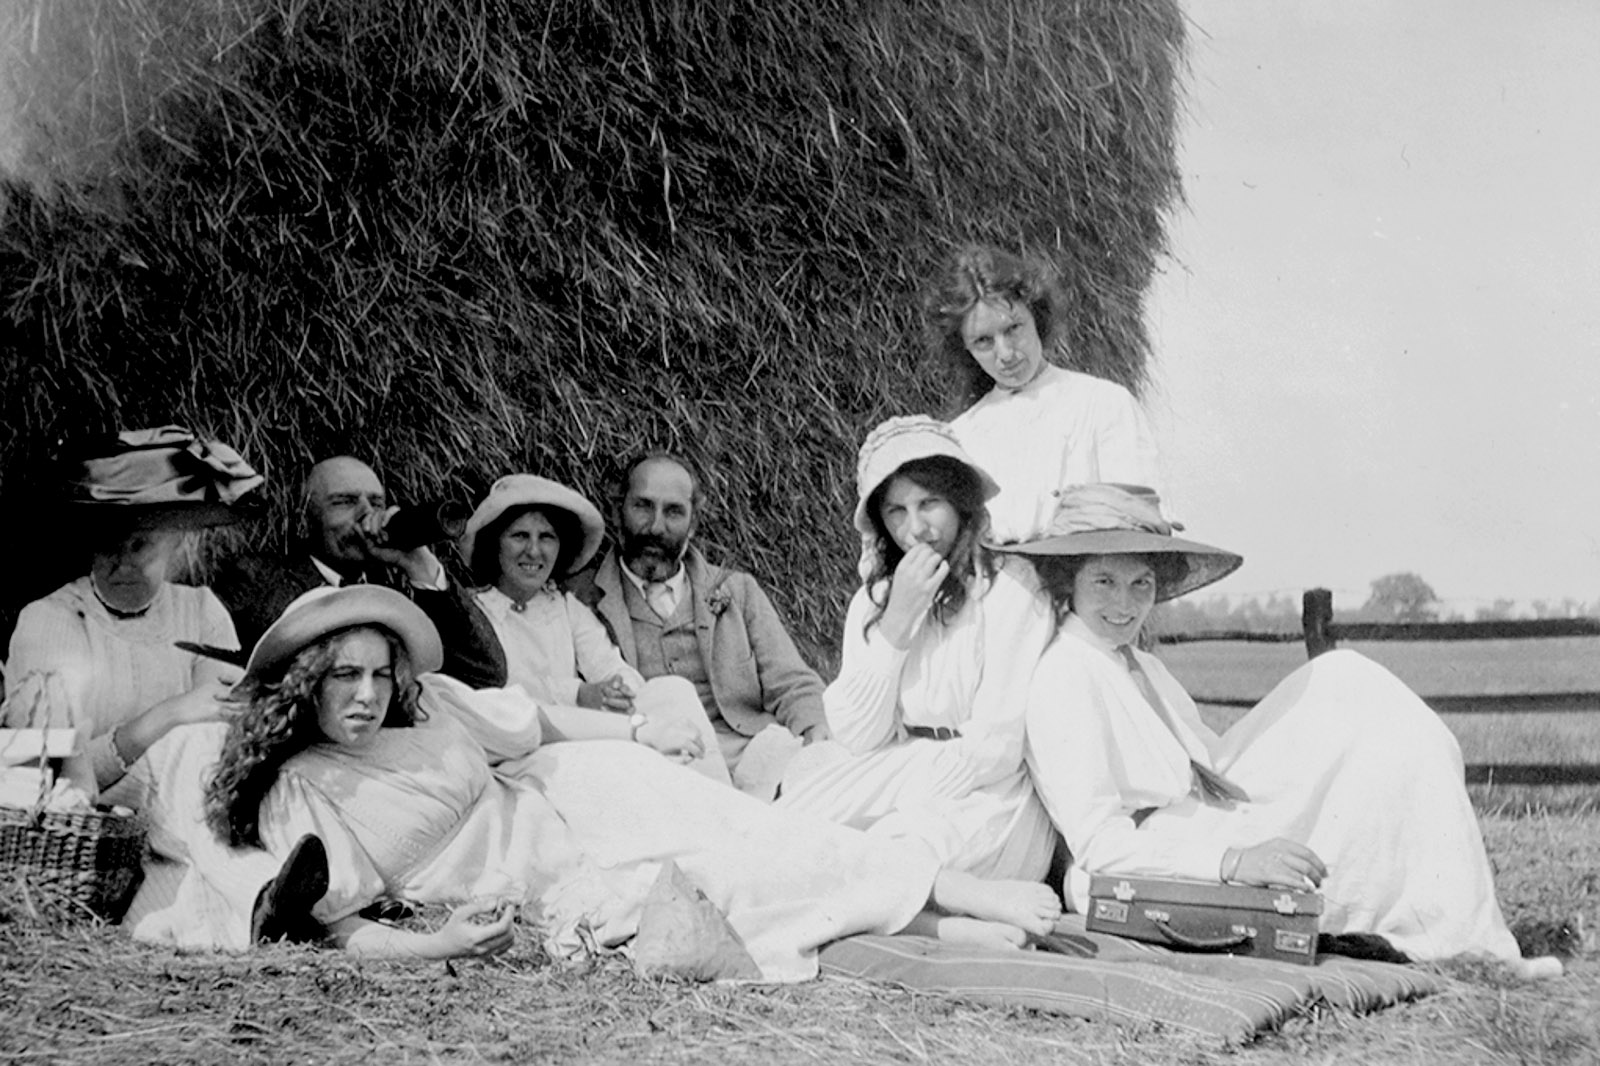 The Oliver sisters at a picnic, Hampshire, 1910